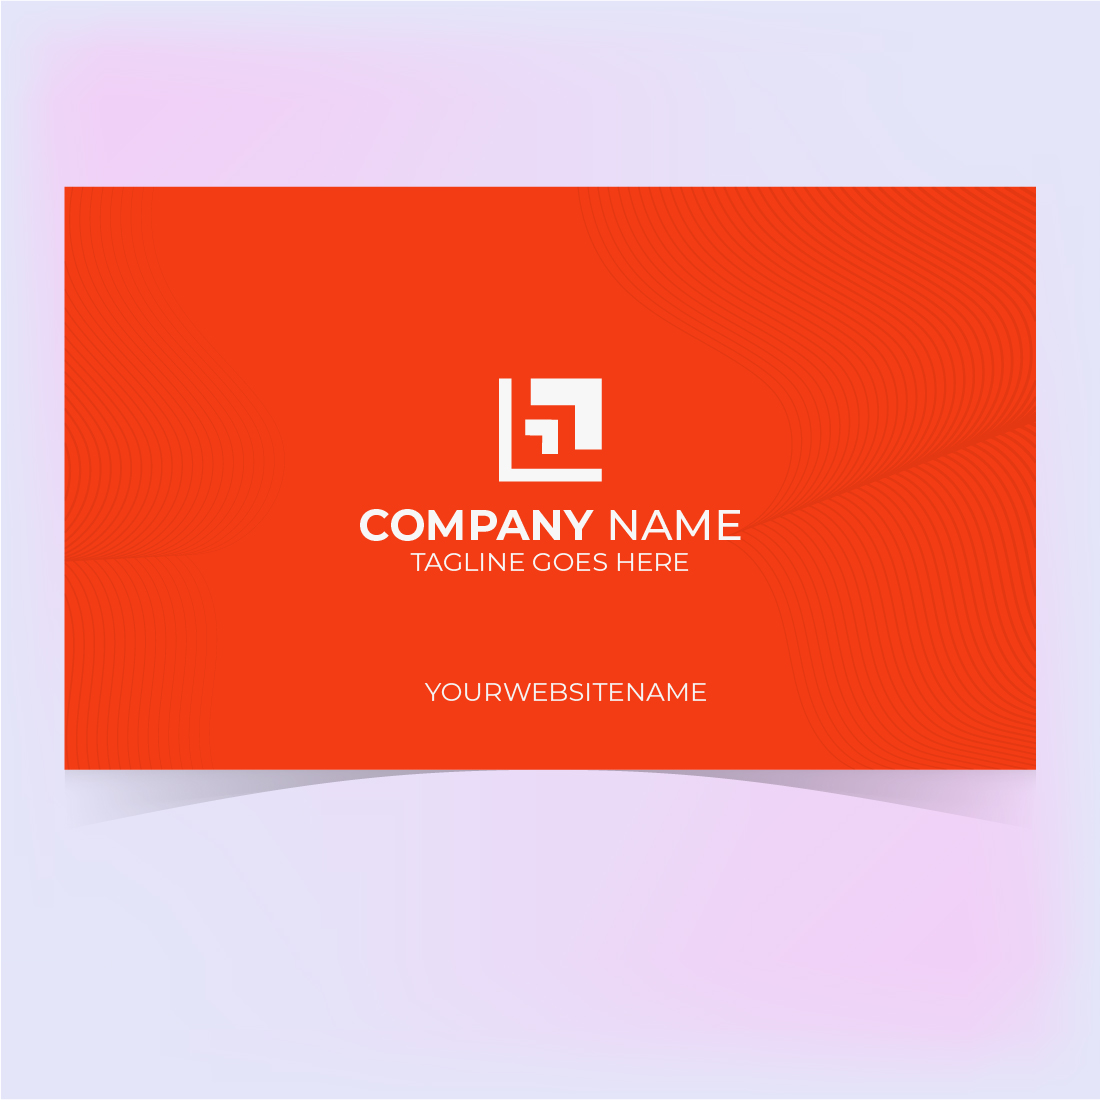 HR business card preview image.